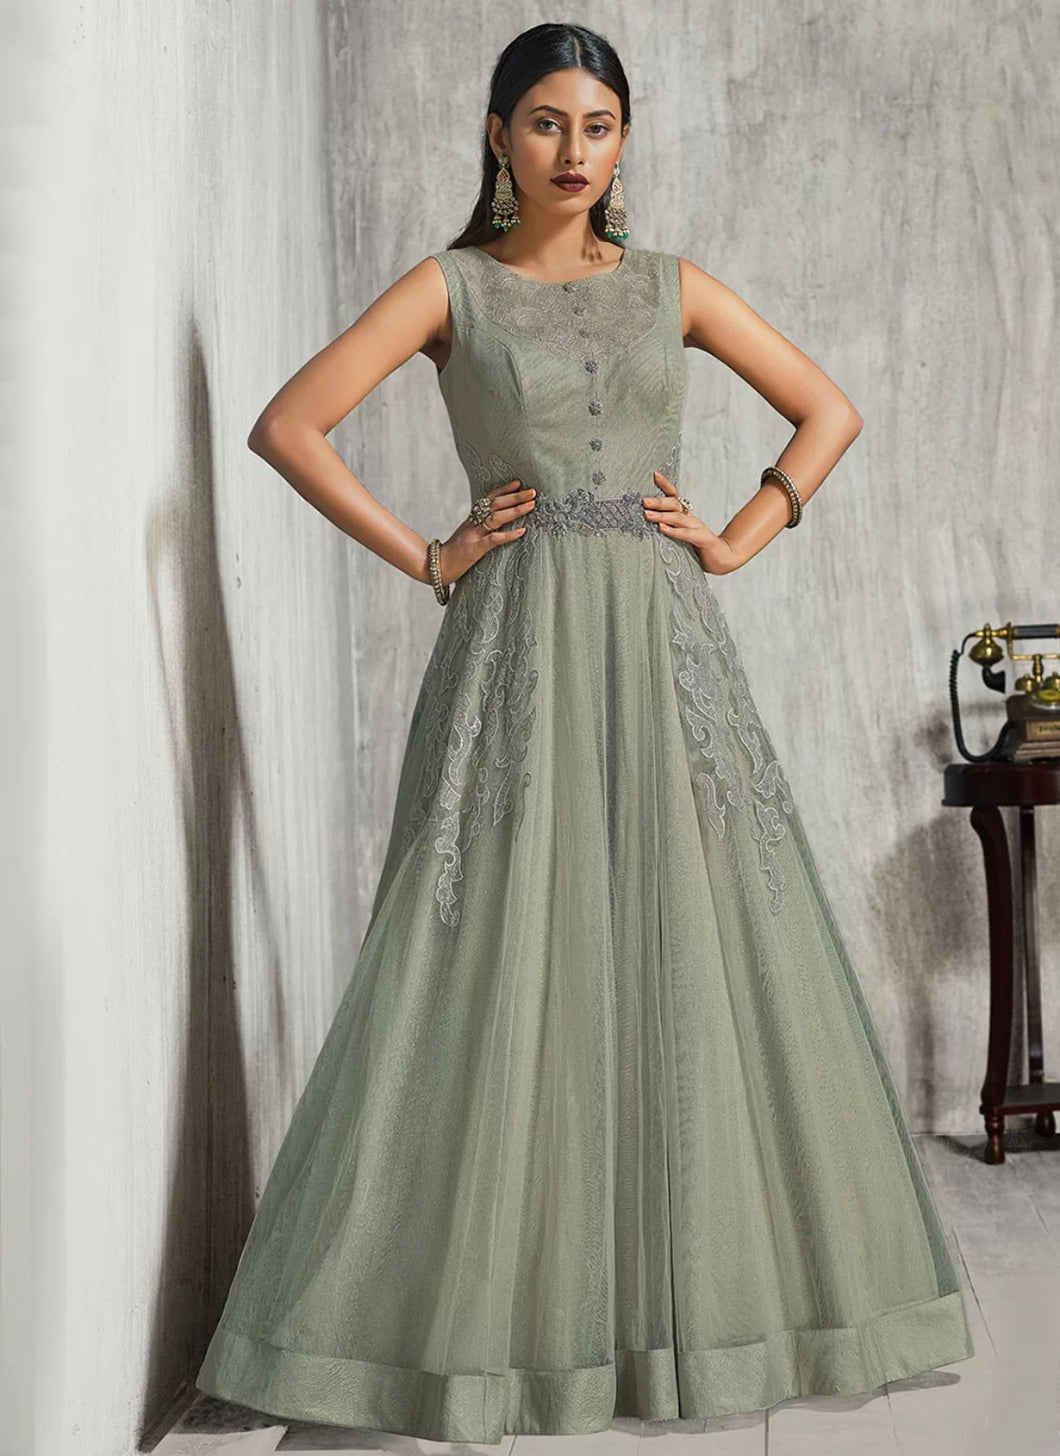 Green embroidered gown (UK Size 8)